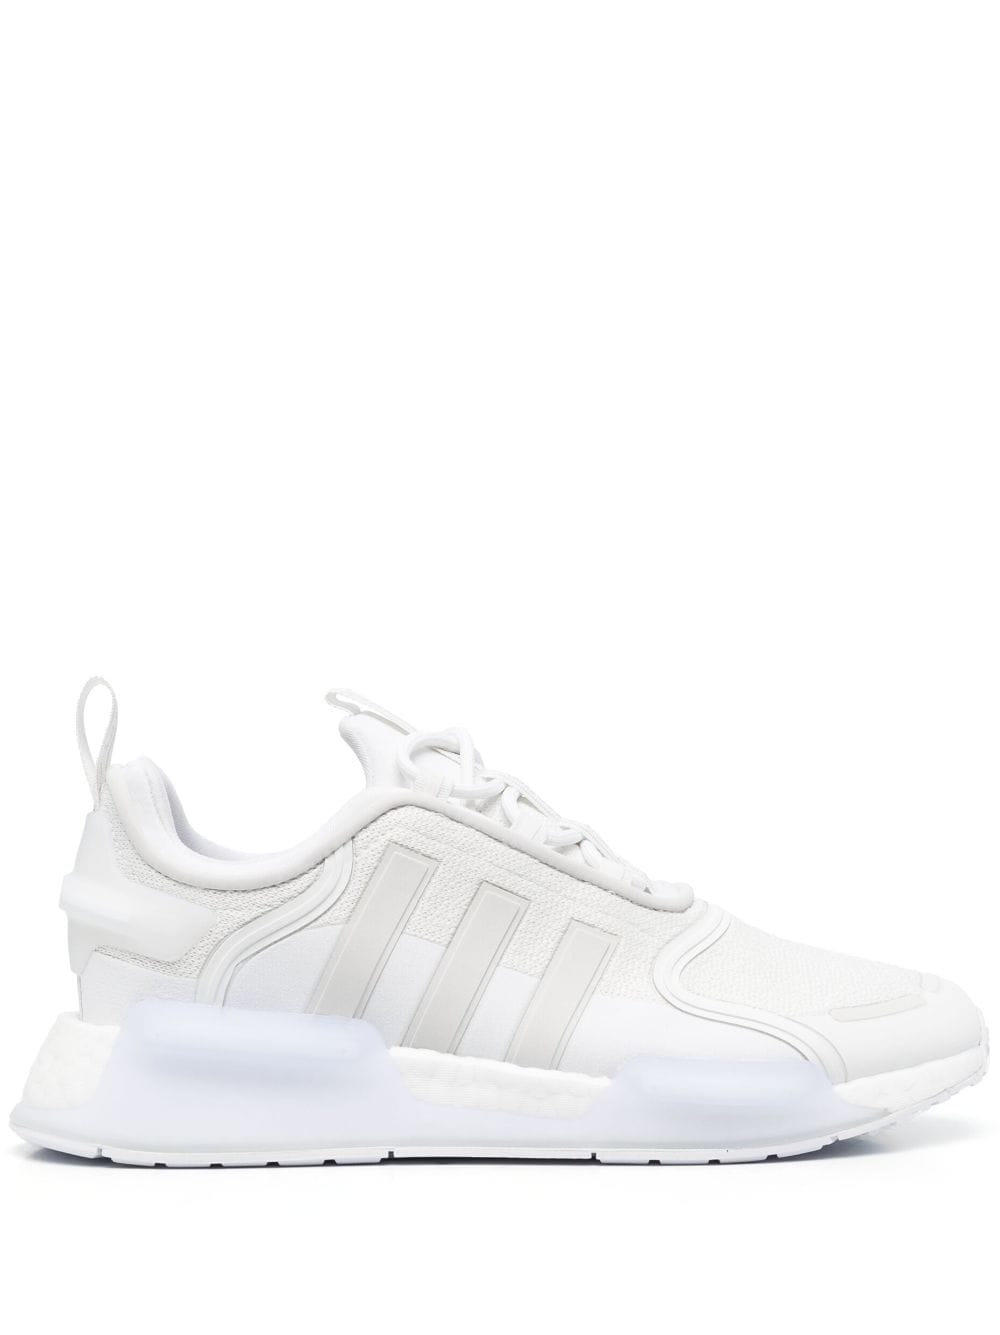 Image 1 of adidas NMD_V3 low-top sneakers